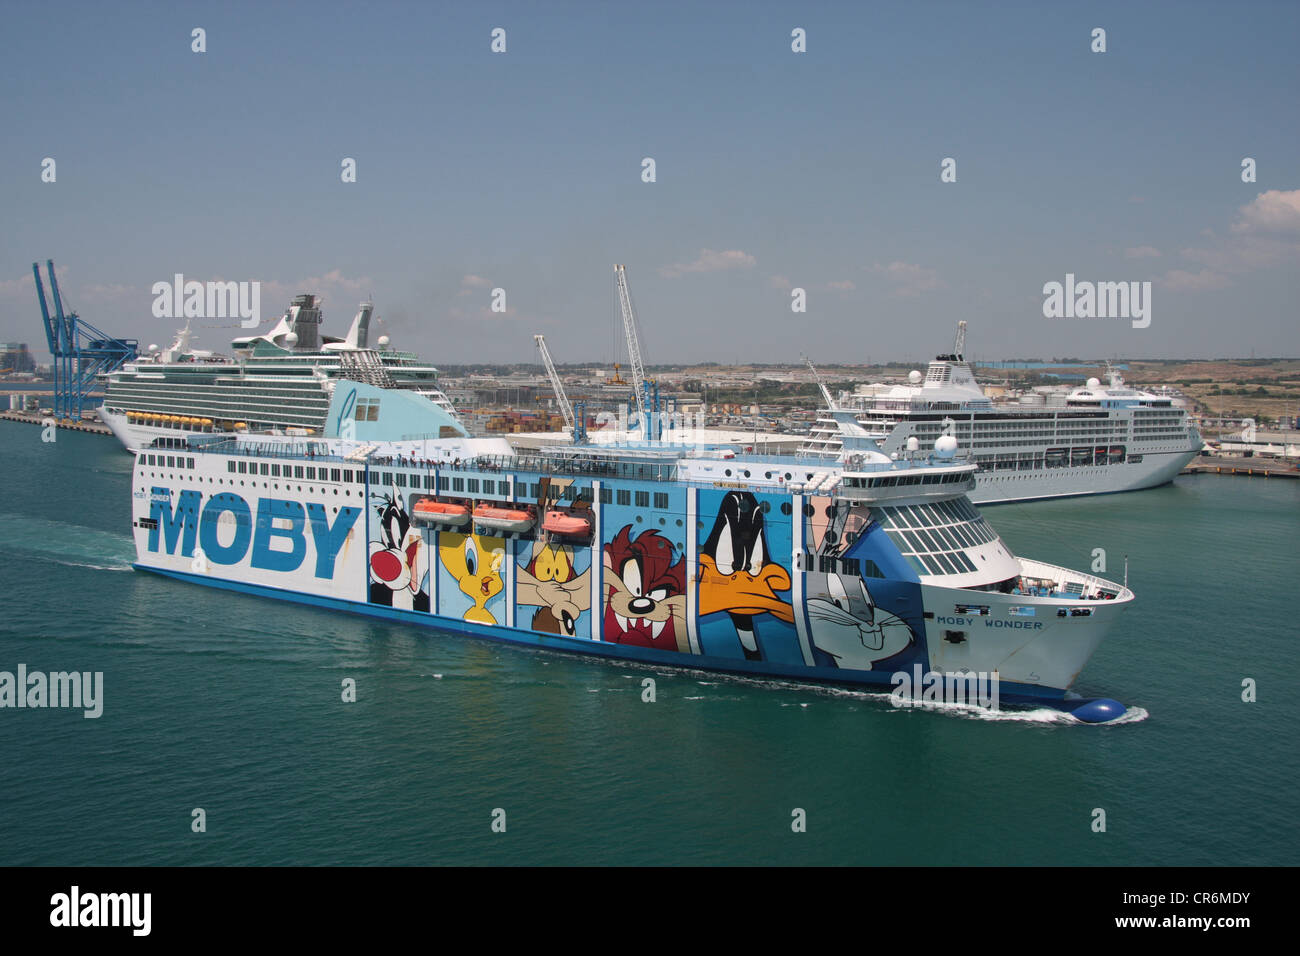 Cartoon characters painted on the side of the Moby Wonder car ferry  arriving at Civitavecchia, Italy Stock Photo - Alamy